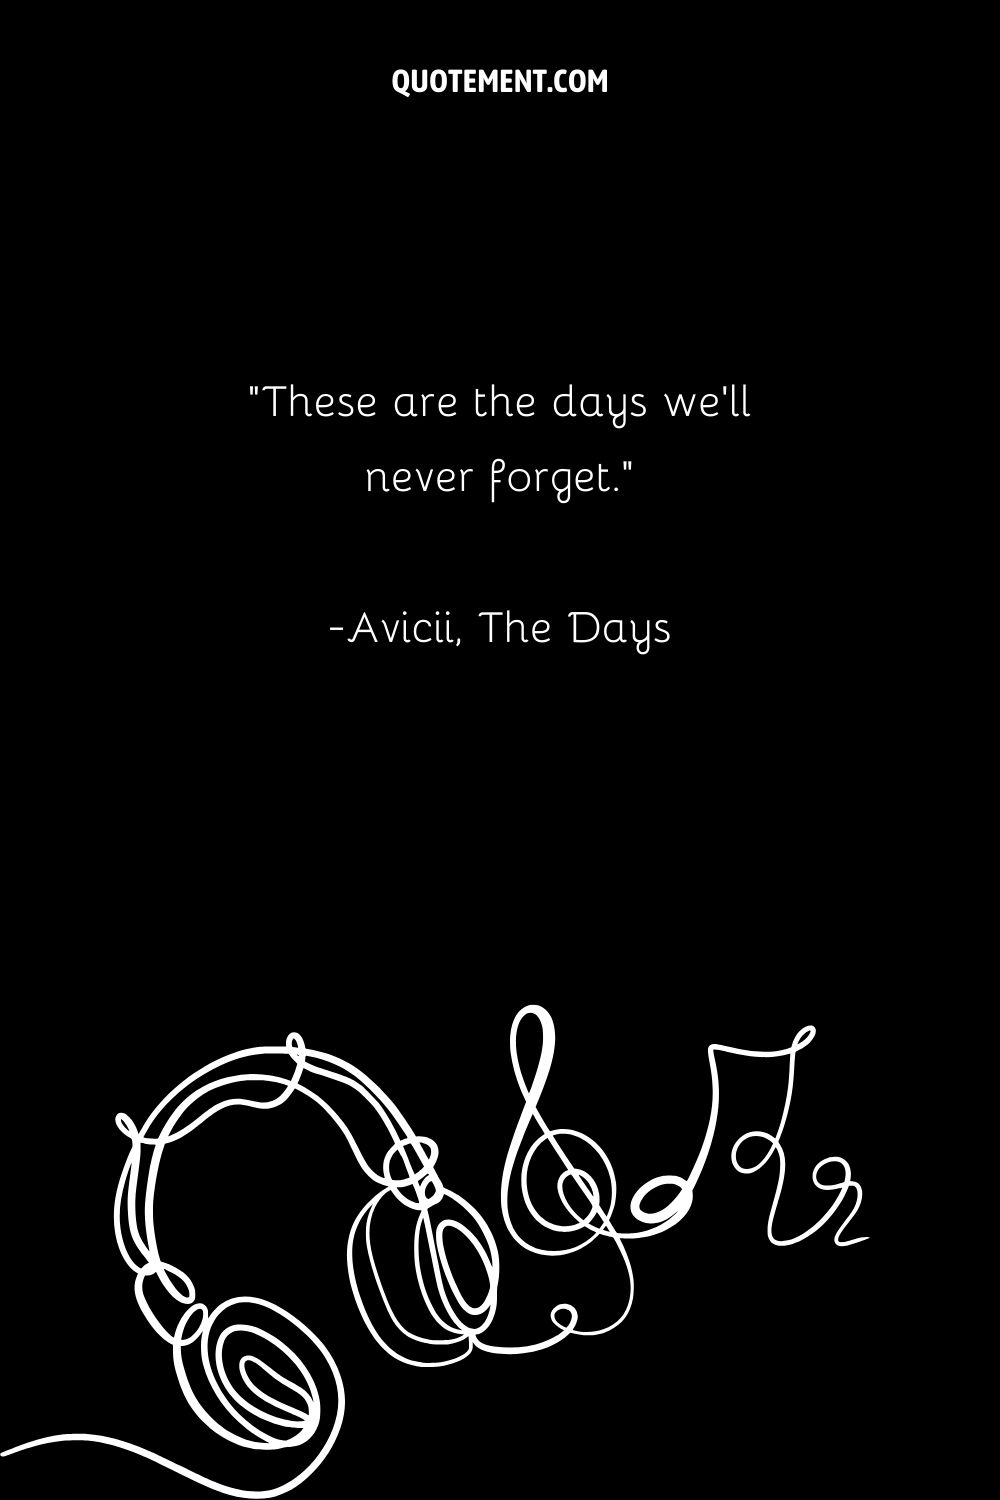 “These are the days we’ll never forget.” — Avicii, The Days